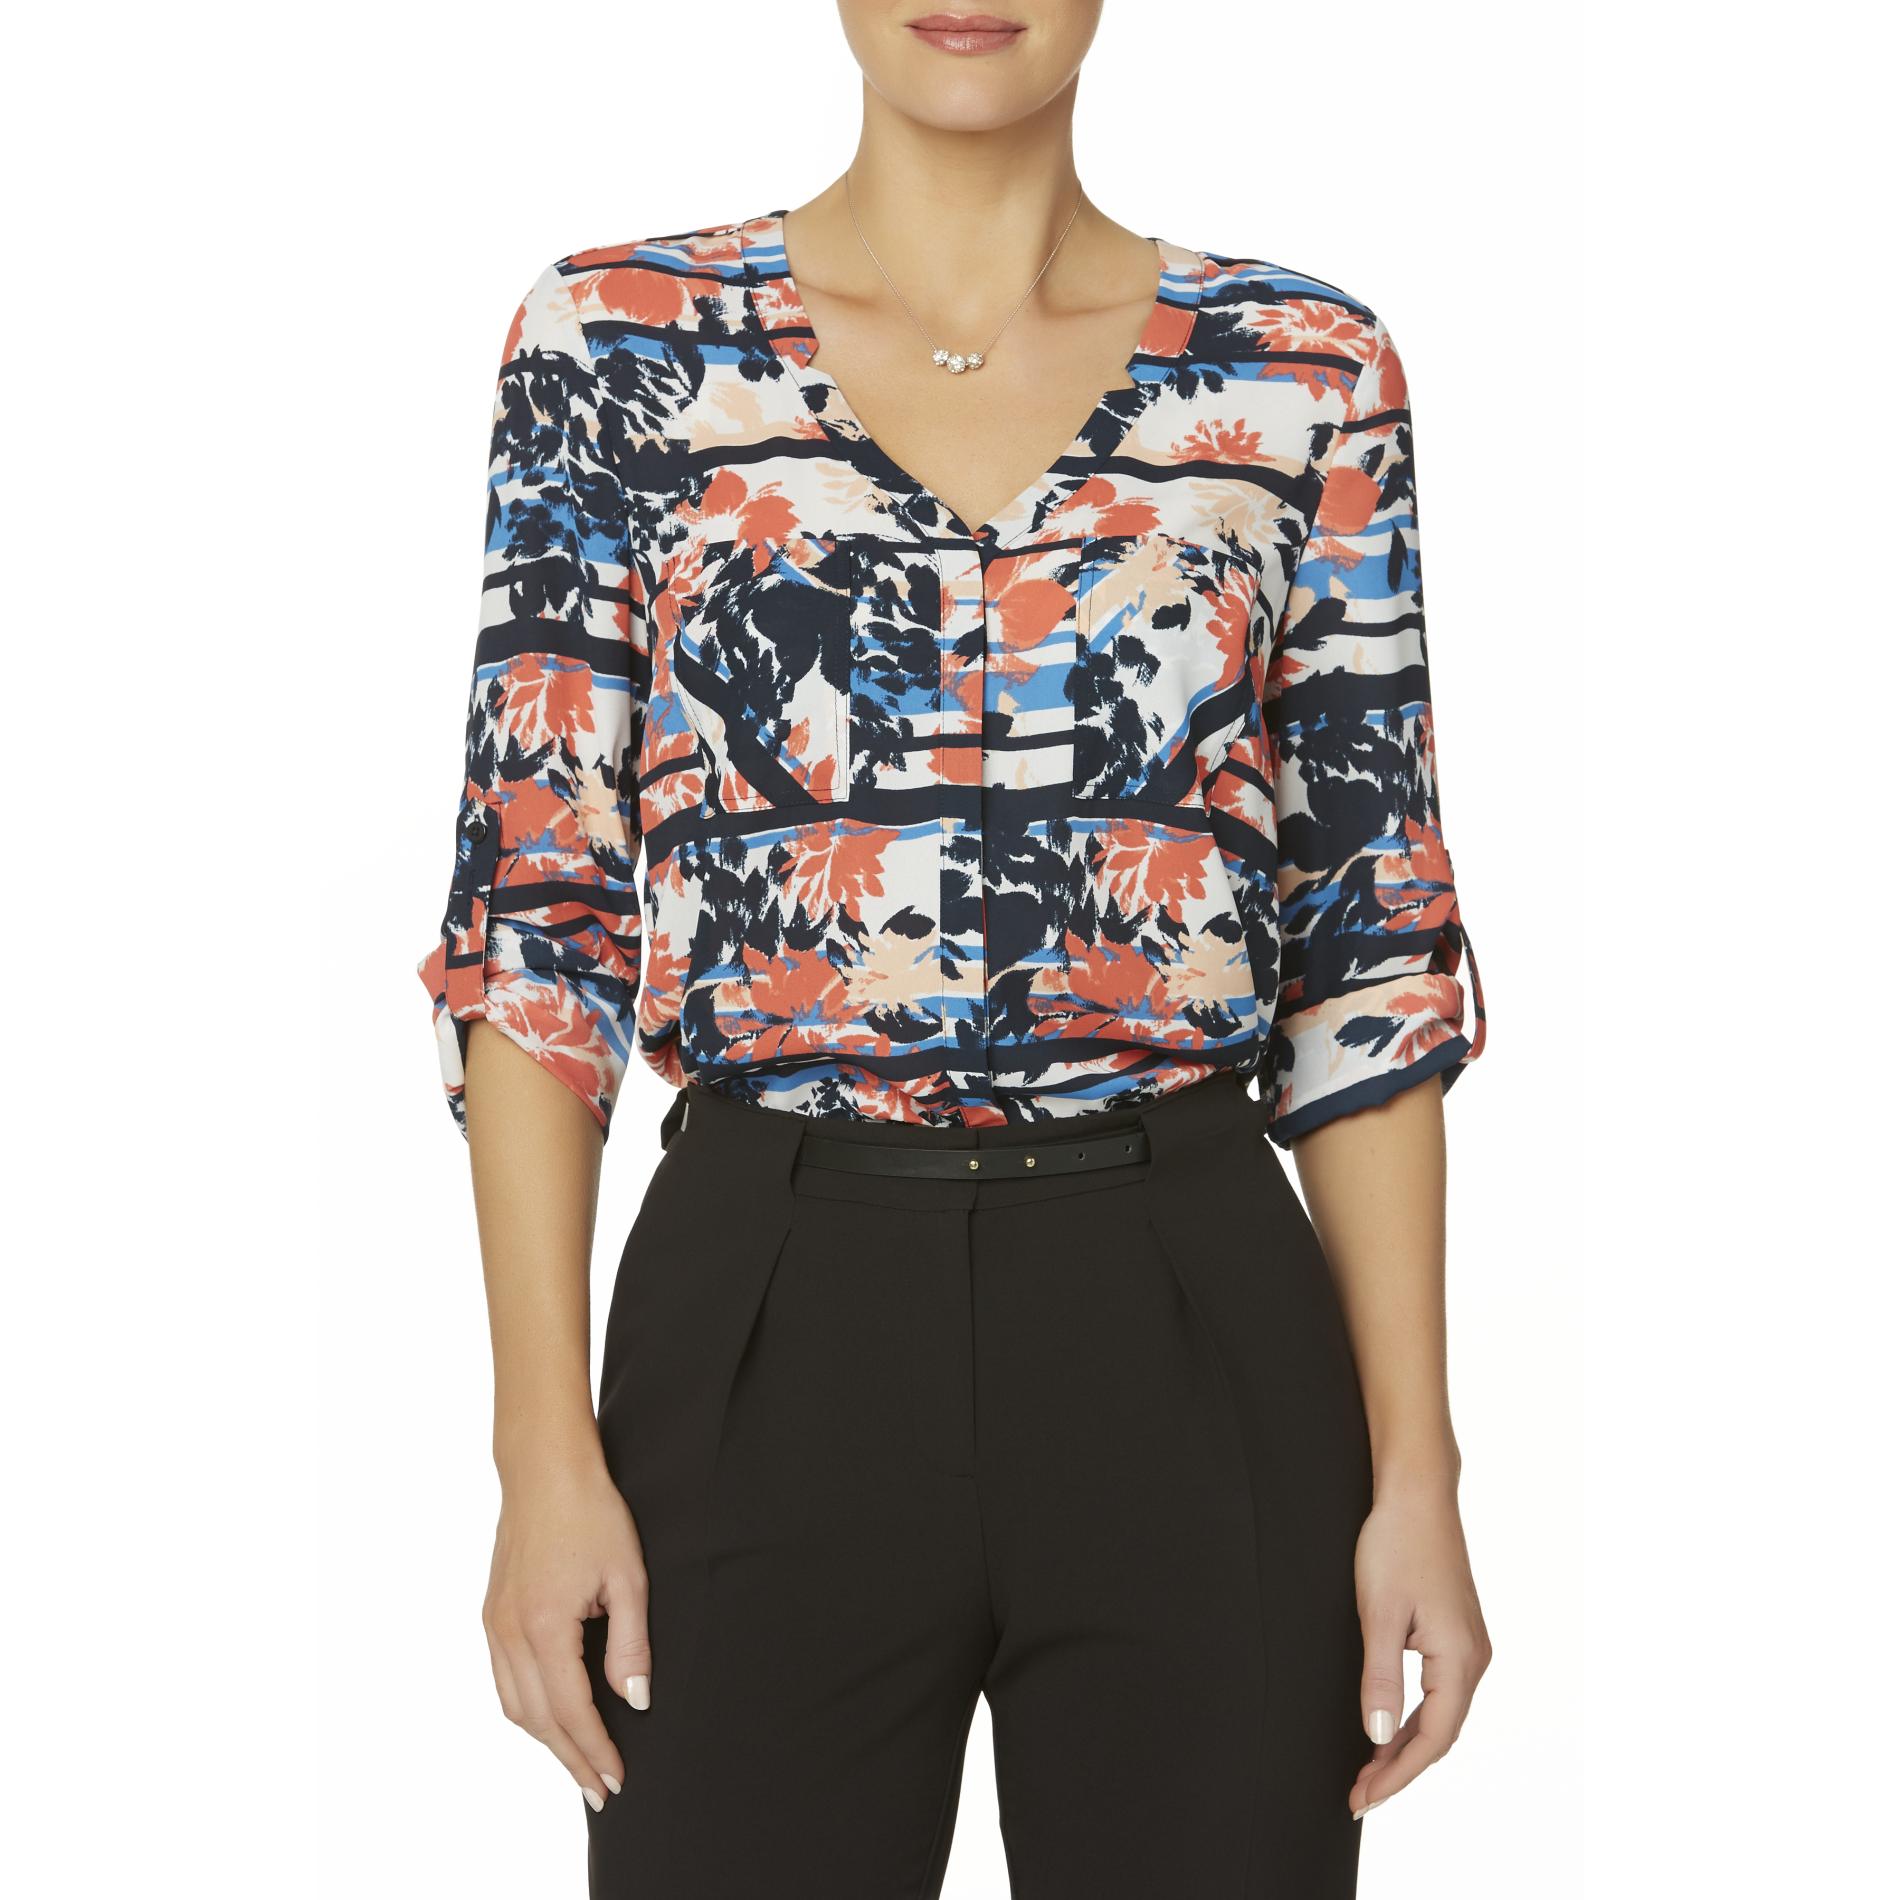 Simply Styled Women's Chiffon Blouse - Abstract Floral